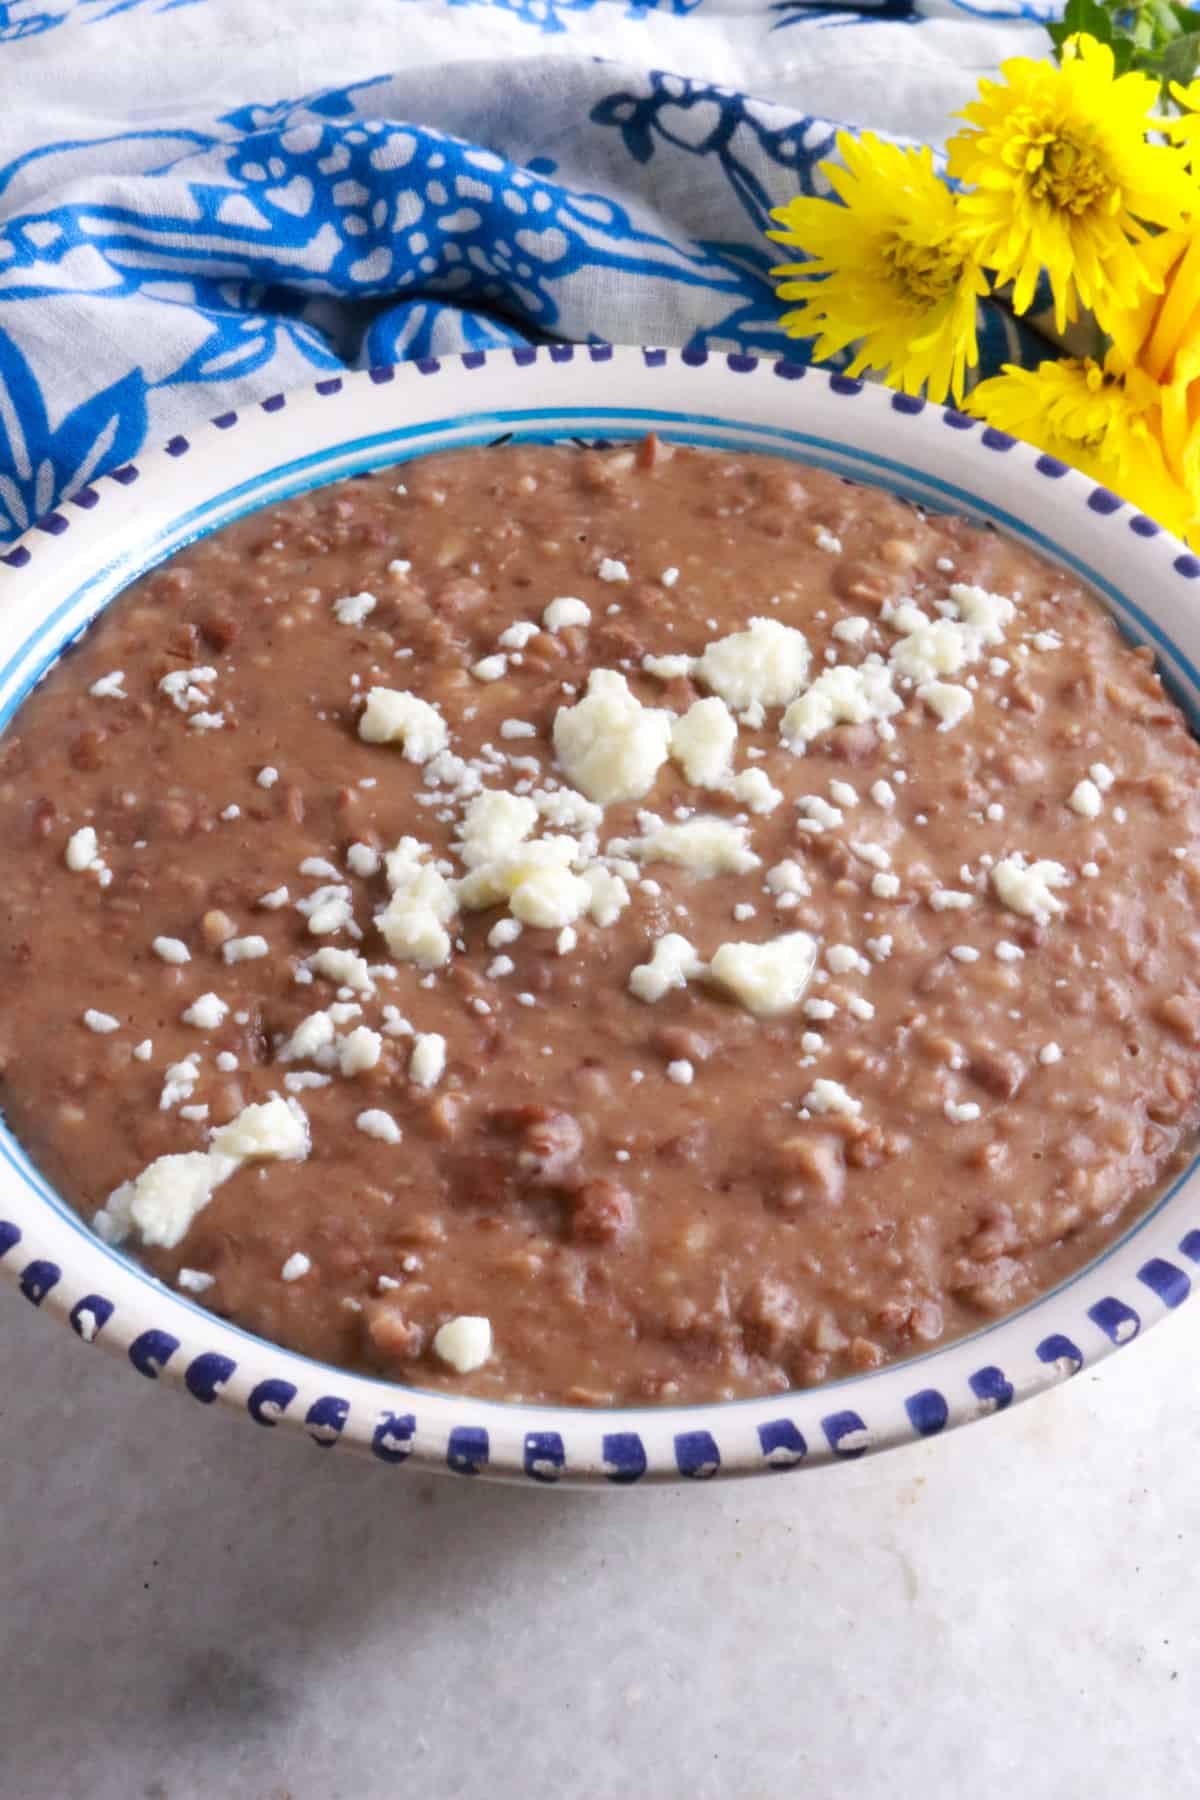 A bowl with creamy refried beans with a some crumbled queso fresco on top